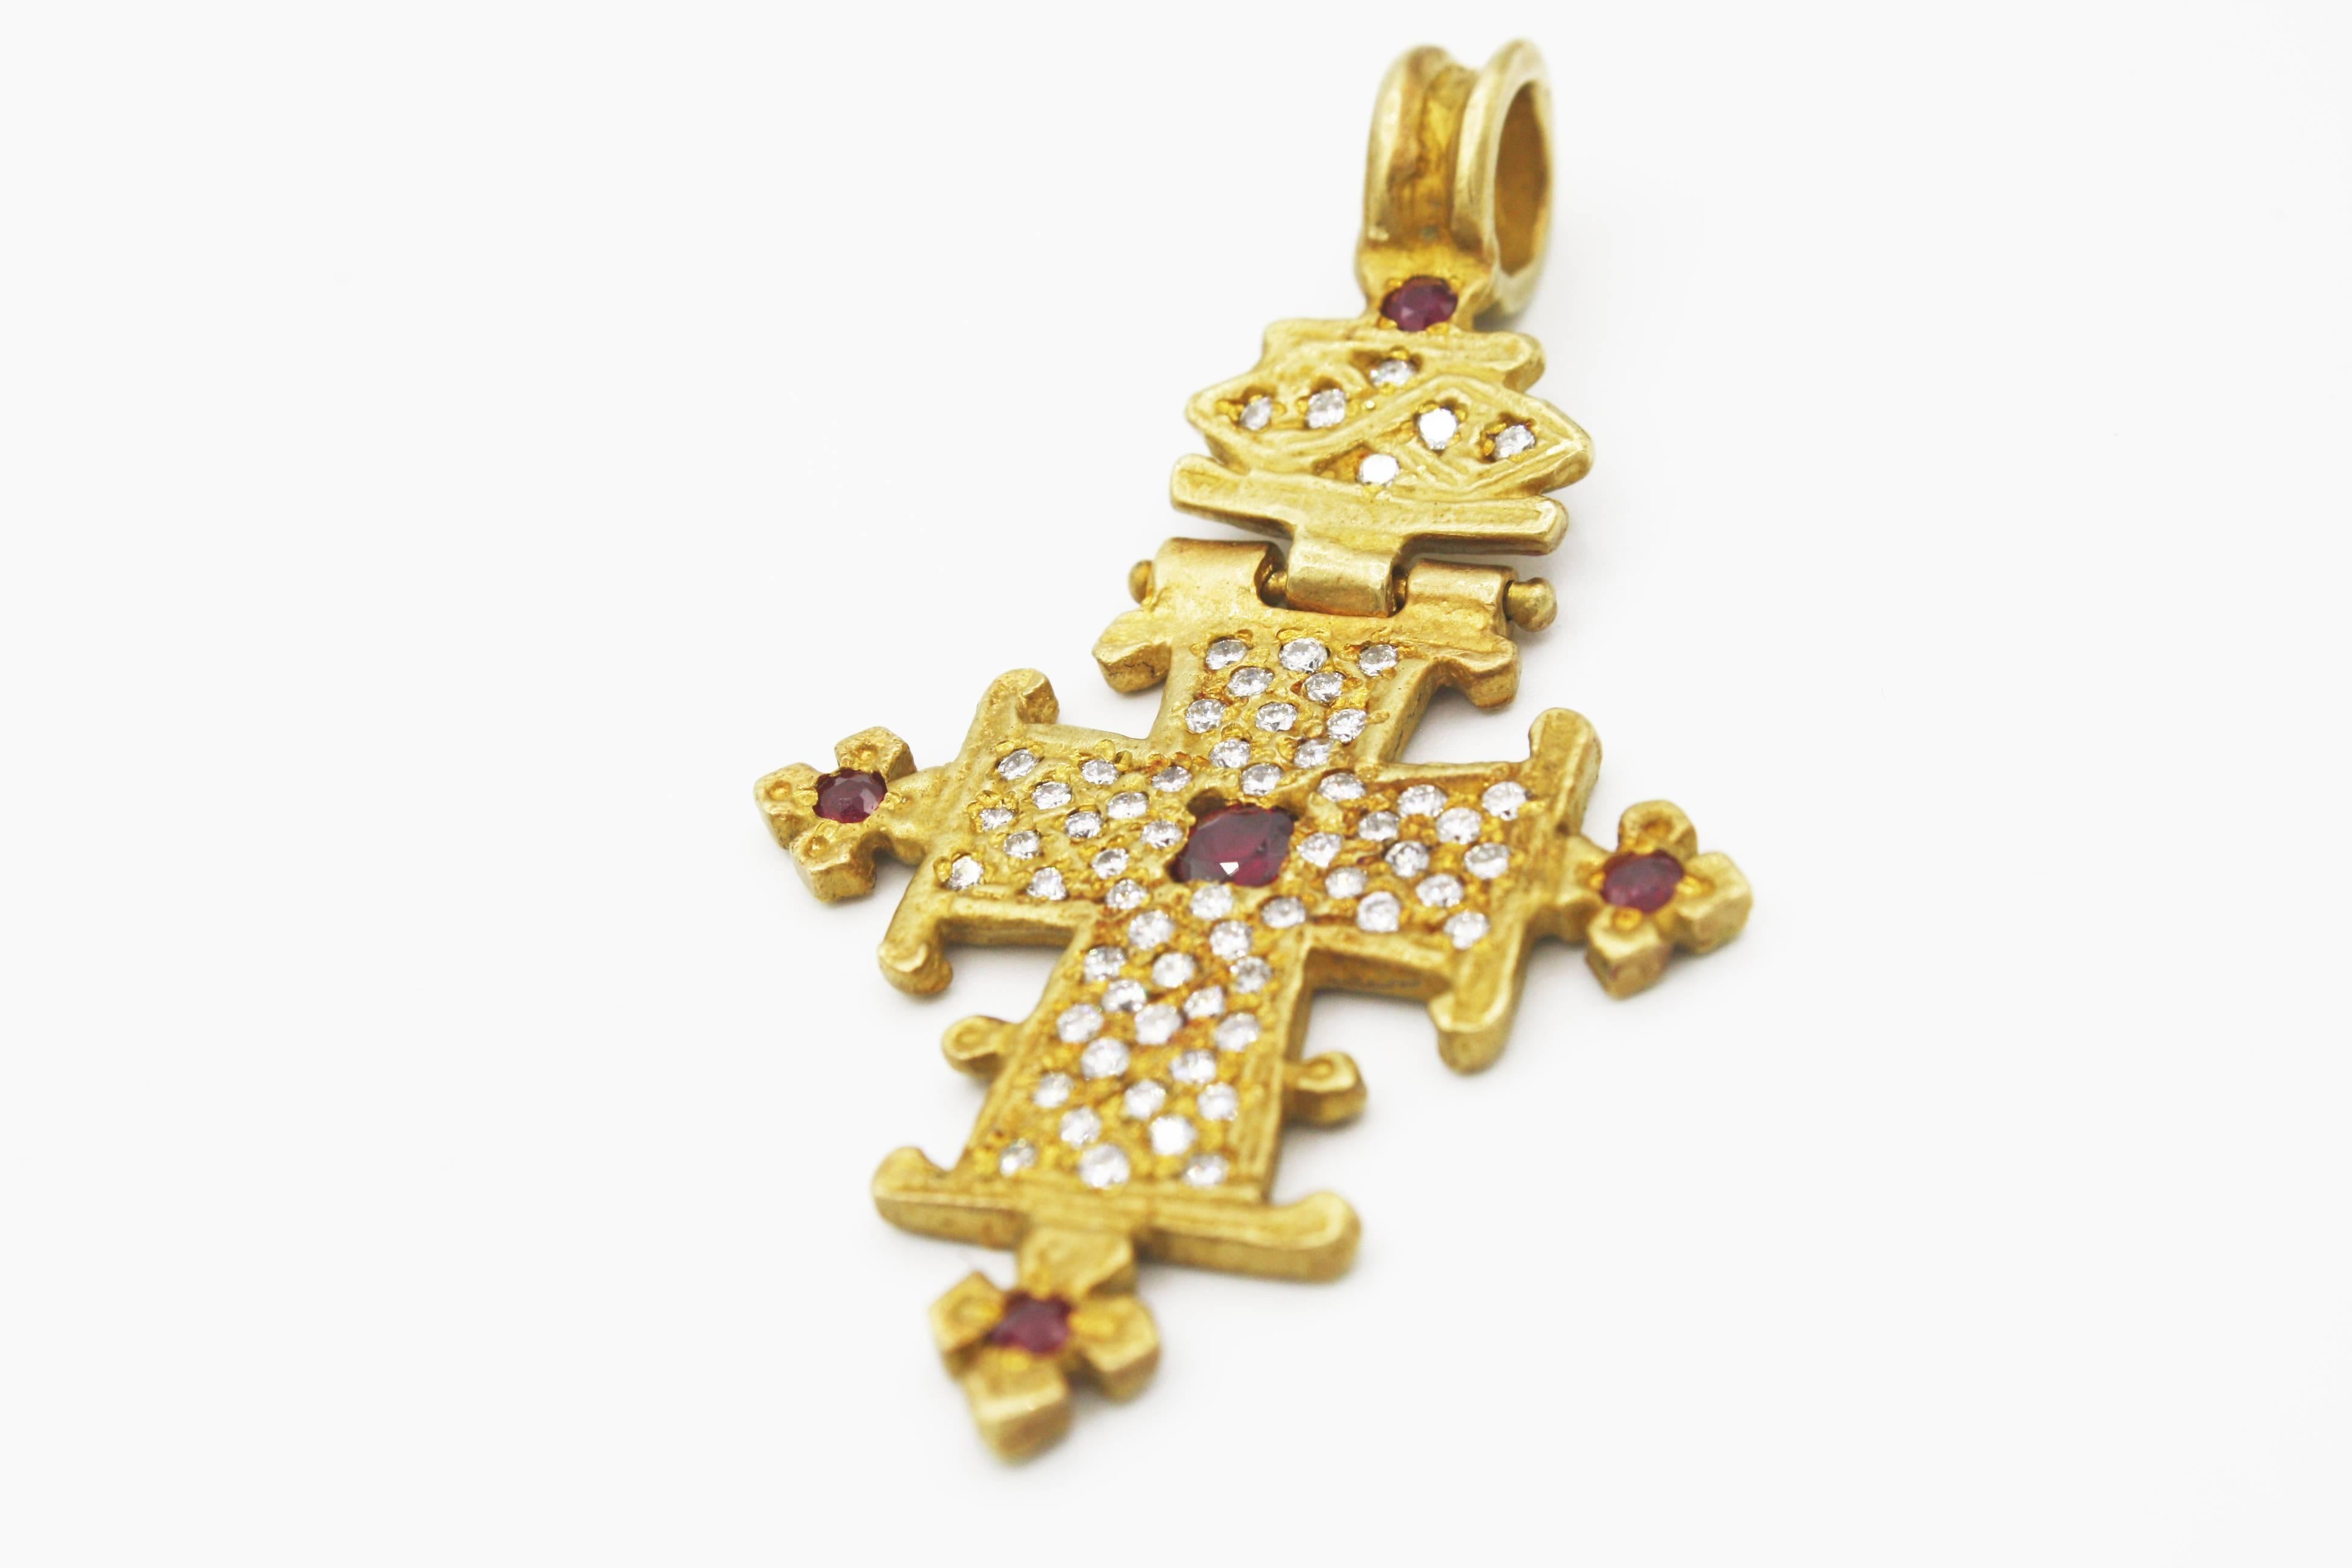 This eye catching Renato Cipullo 18k yellow gold cross pendant features 69 .70ct diamonds and 4 .32ct rubies with a delicate hinge allowing the cross and loop to flex.